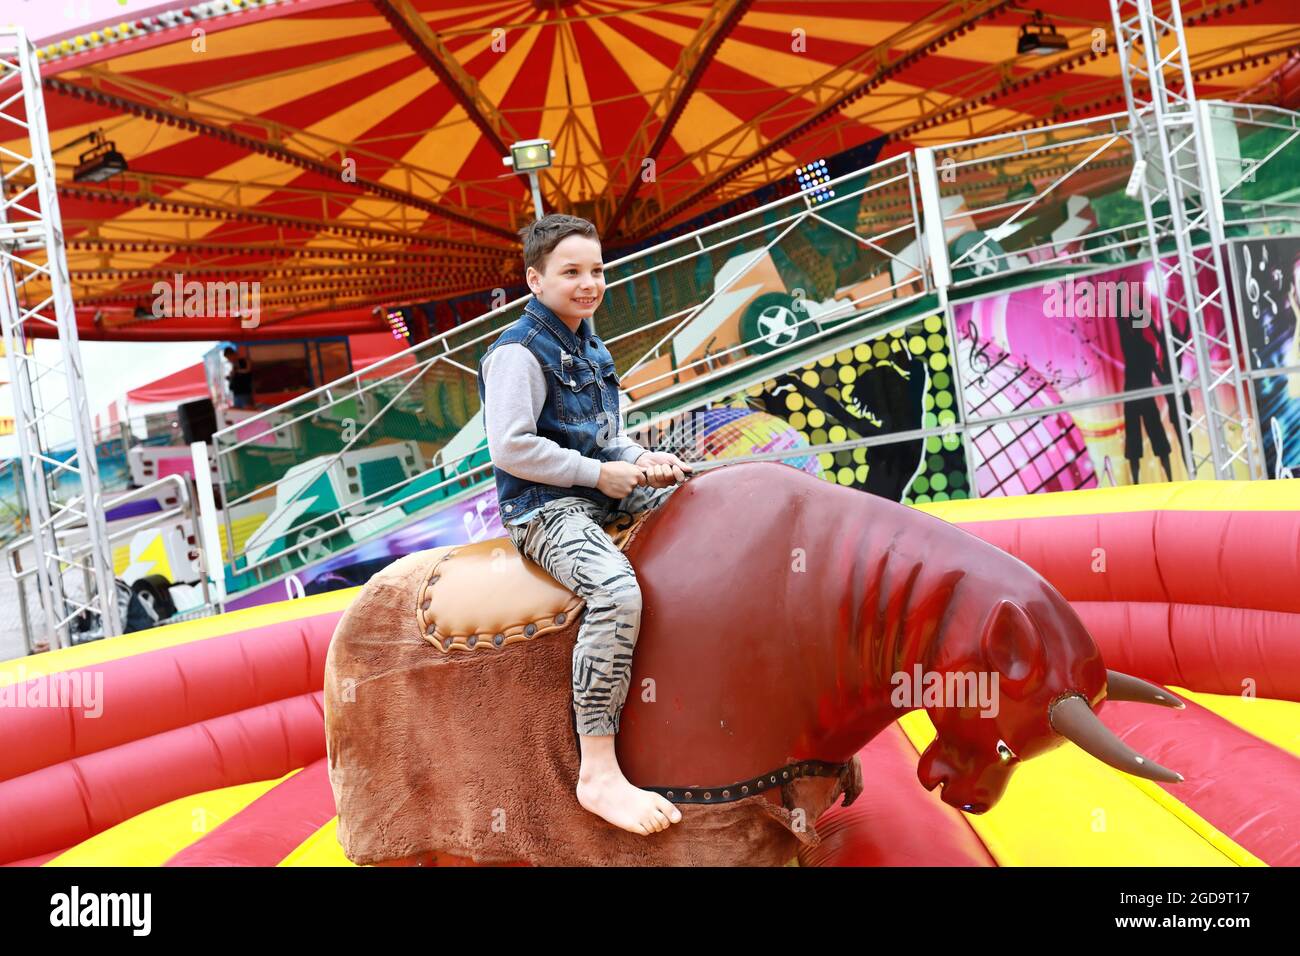 Child riding on mechanical bull in amusement park Stock Photo